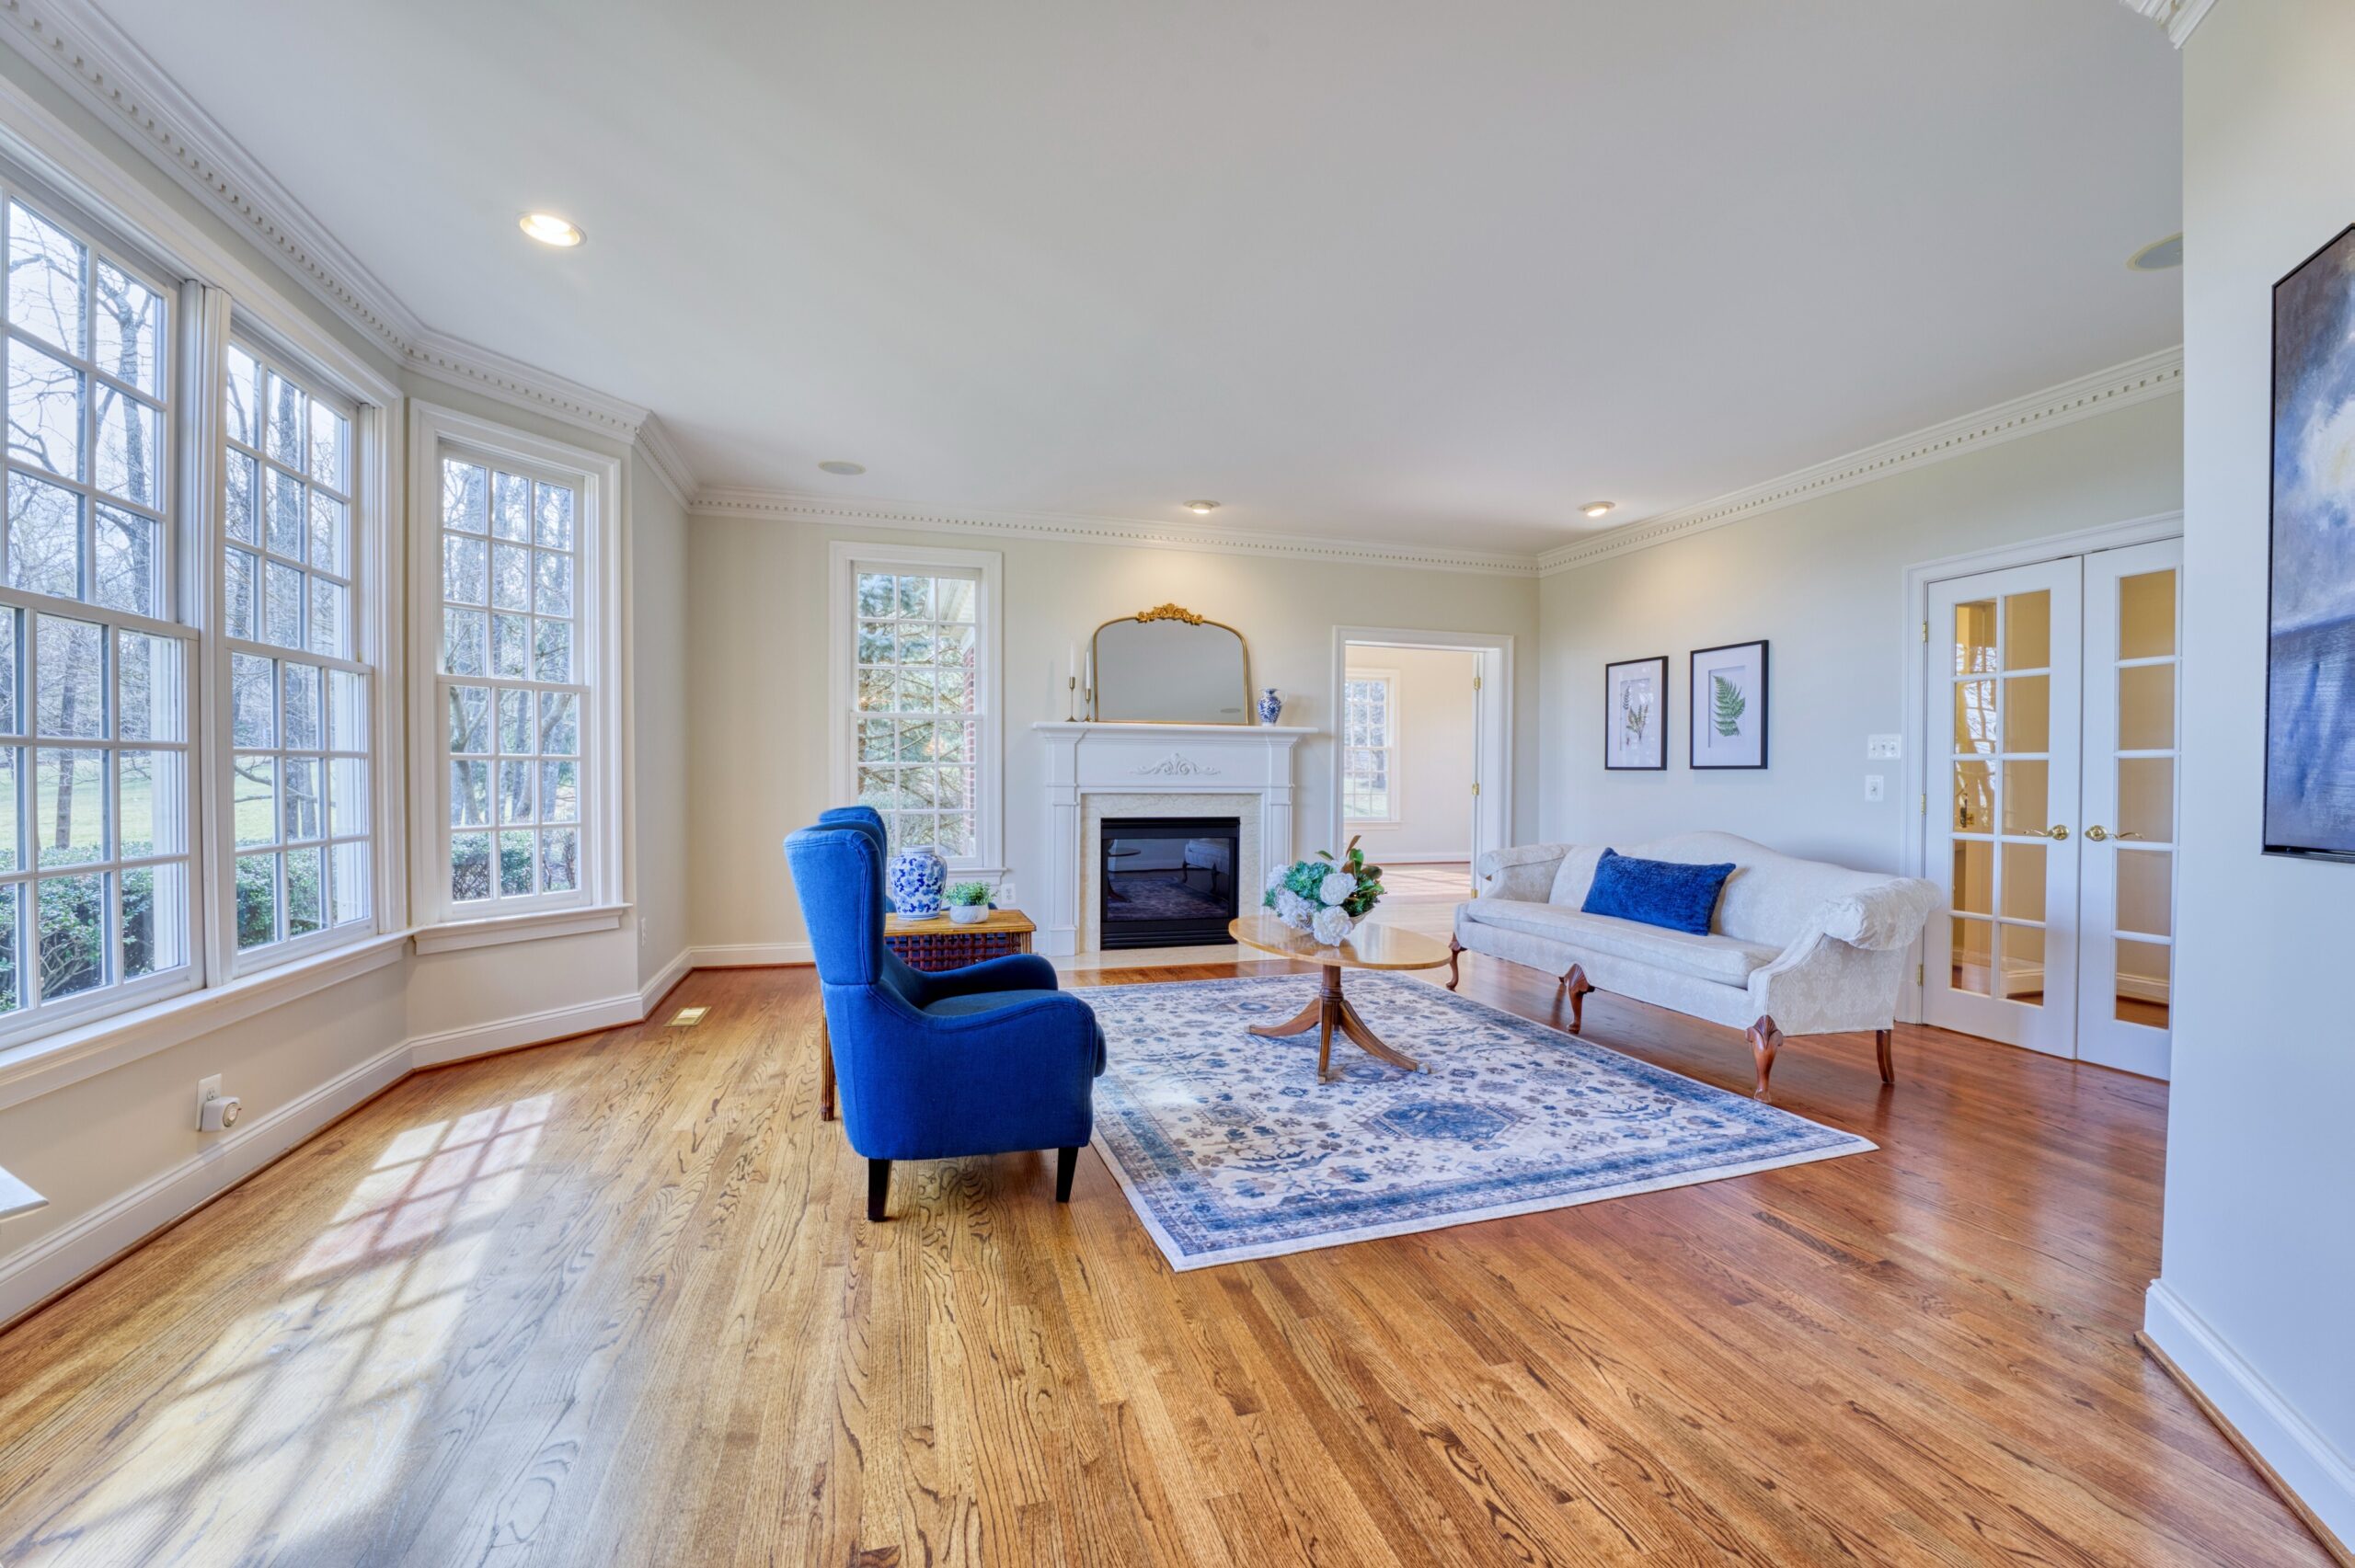 Professional interior photo of 17087 Bold Venture Drive, Leesburg - showing the formal living room with hardwood floors and fireplace